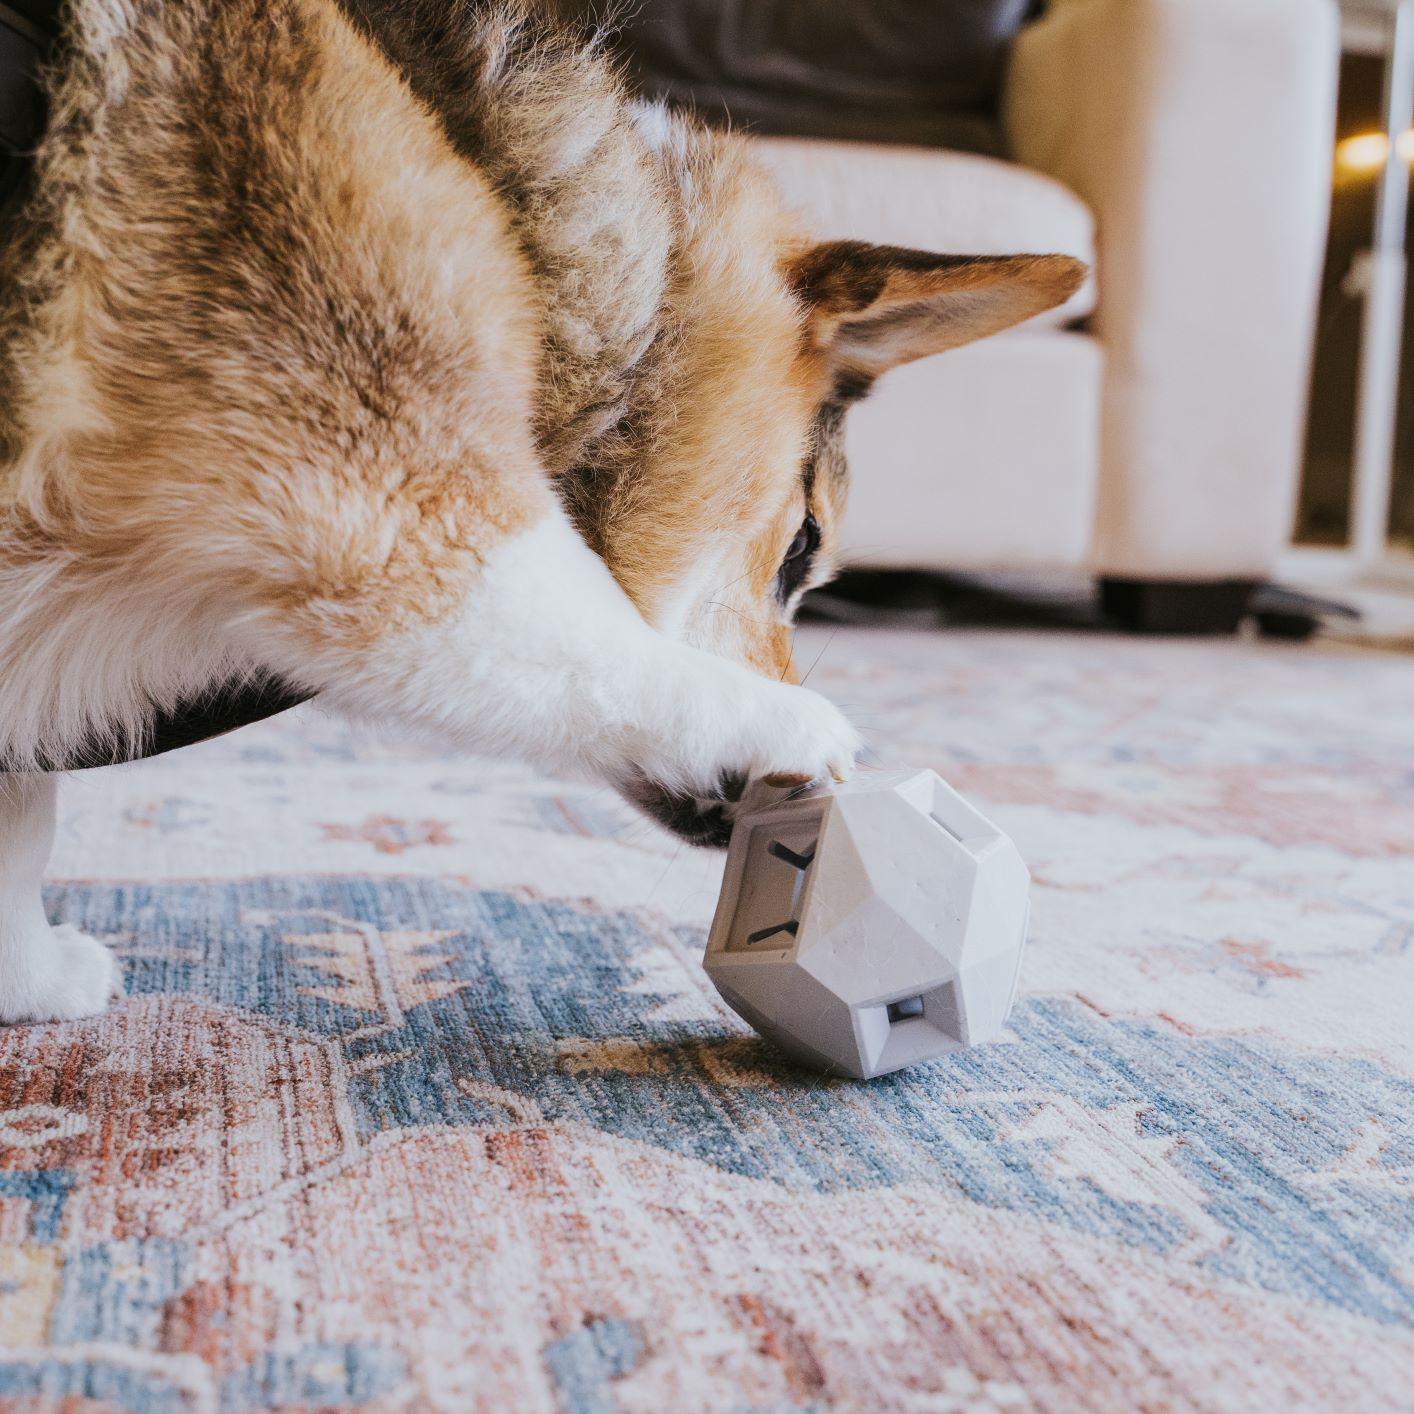 Puzzle Toys are Amazing, Find out Which Puzzle Toys Your Dog Will